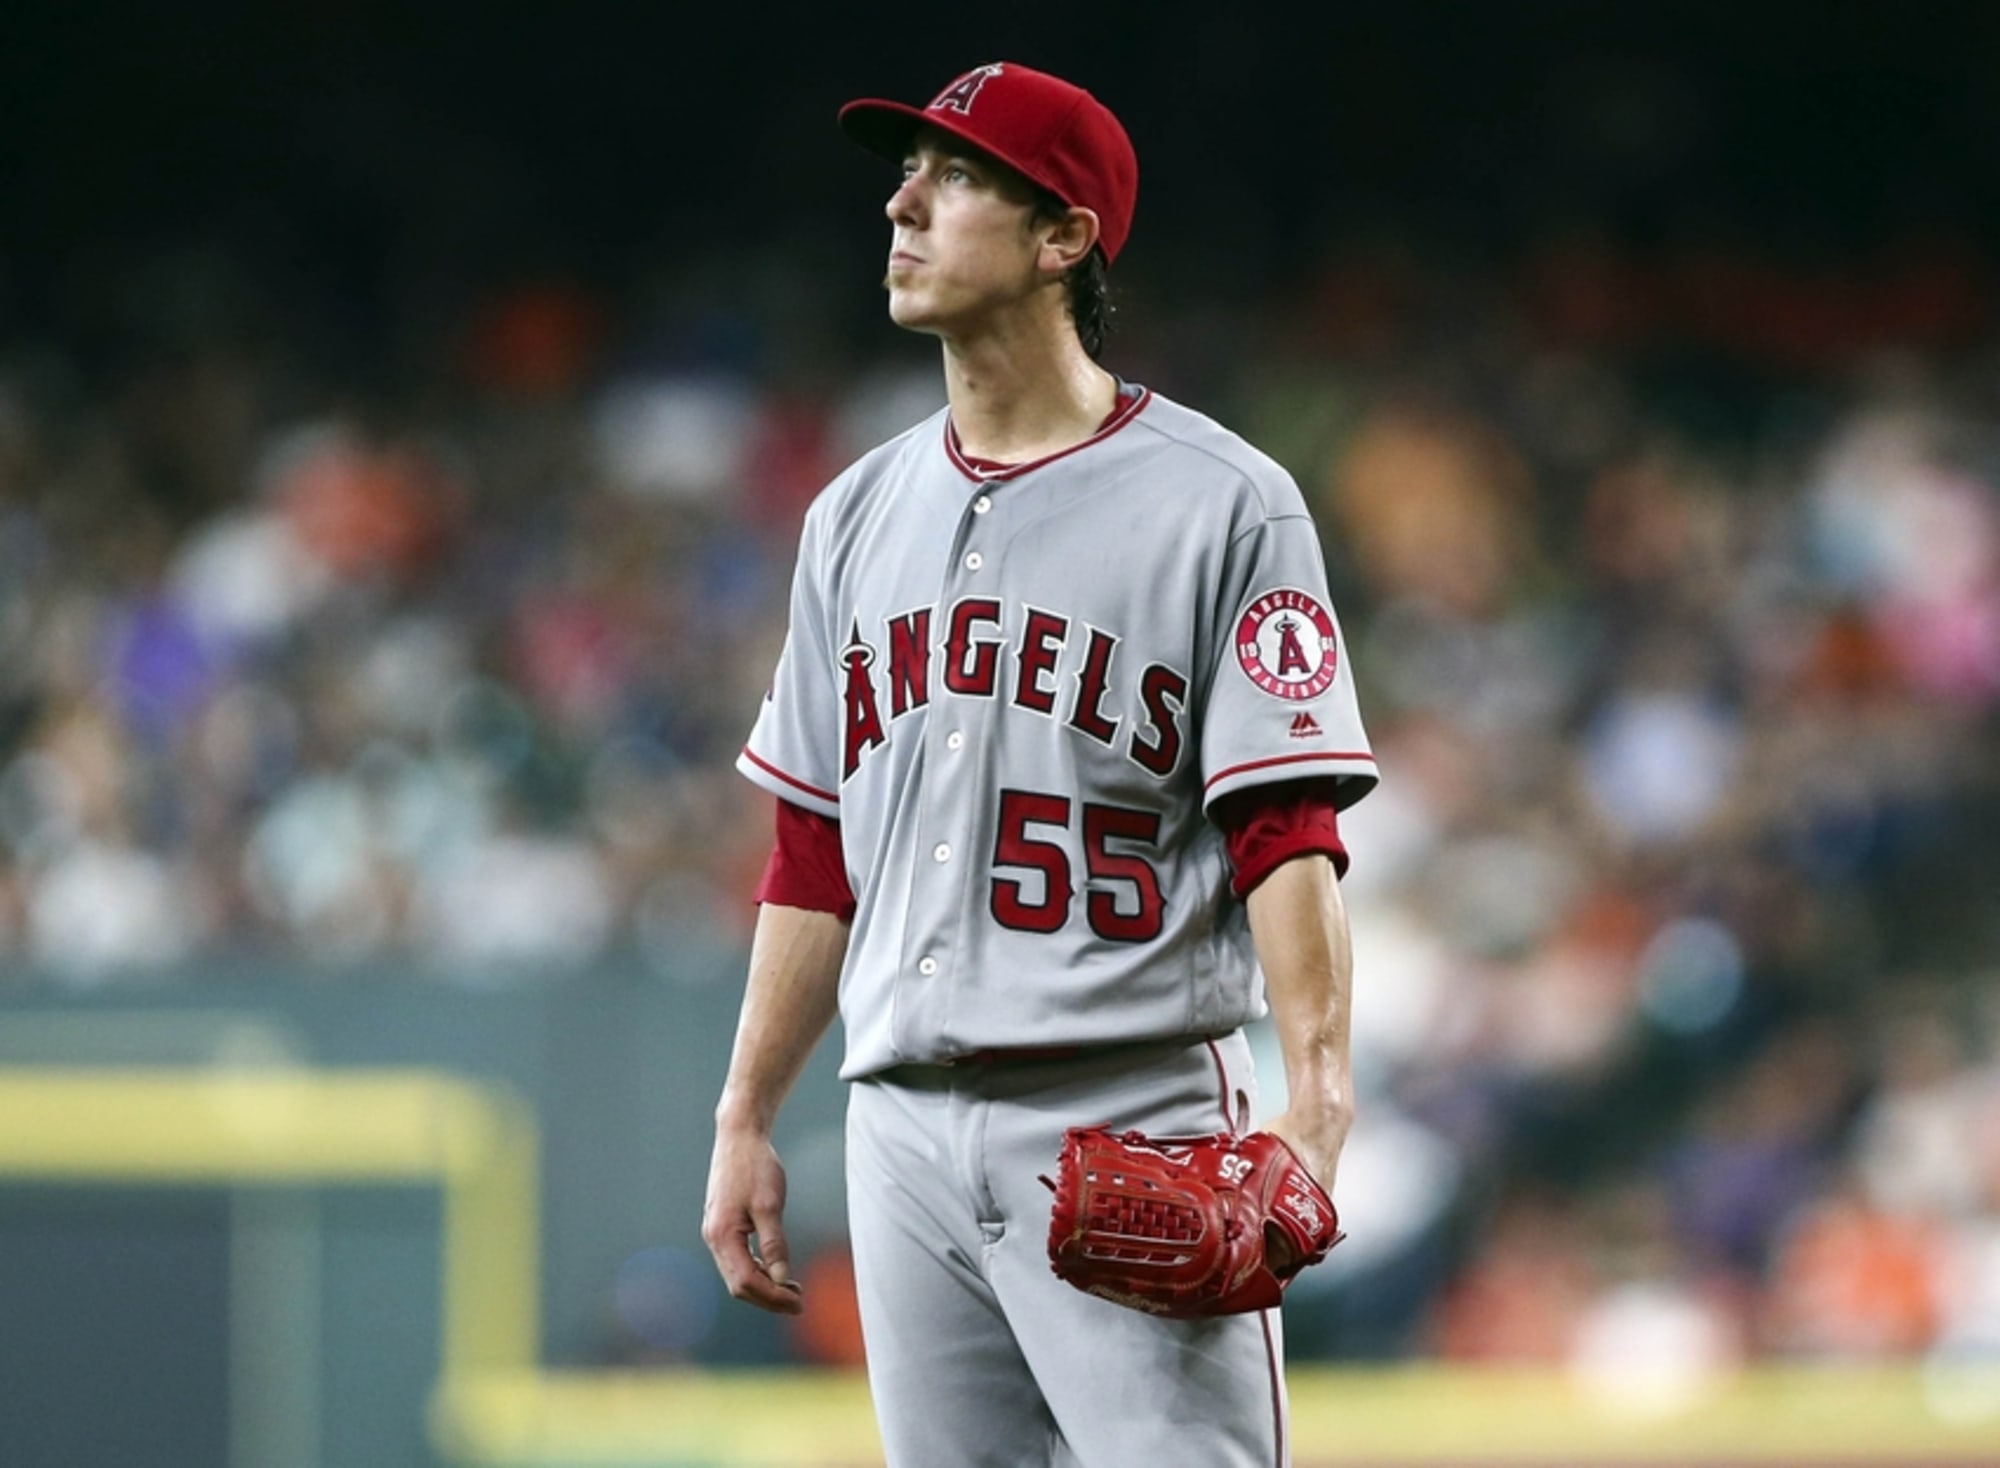 Tim Lincecum roughed up again in Angels' loss to Mariners, which might cost  him spot in rotation – Orange County Register